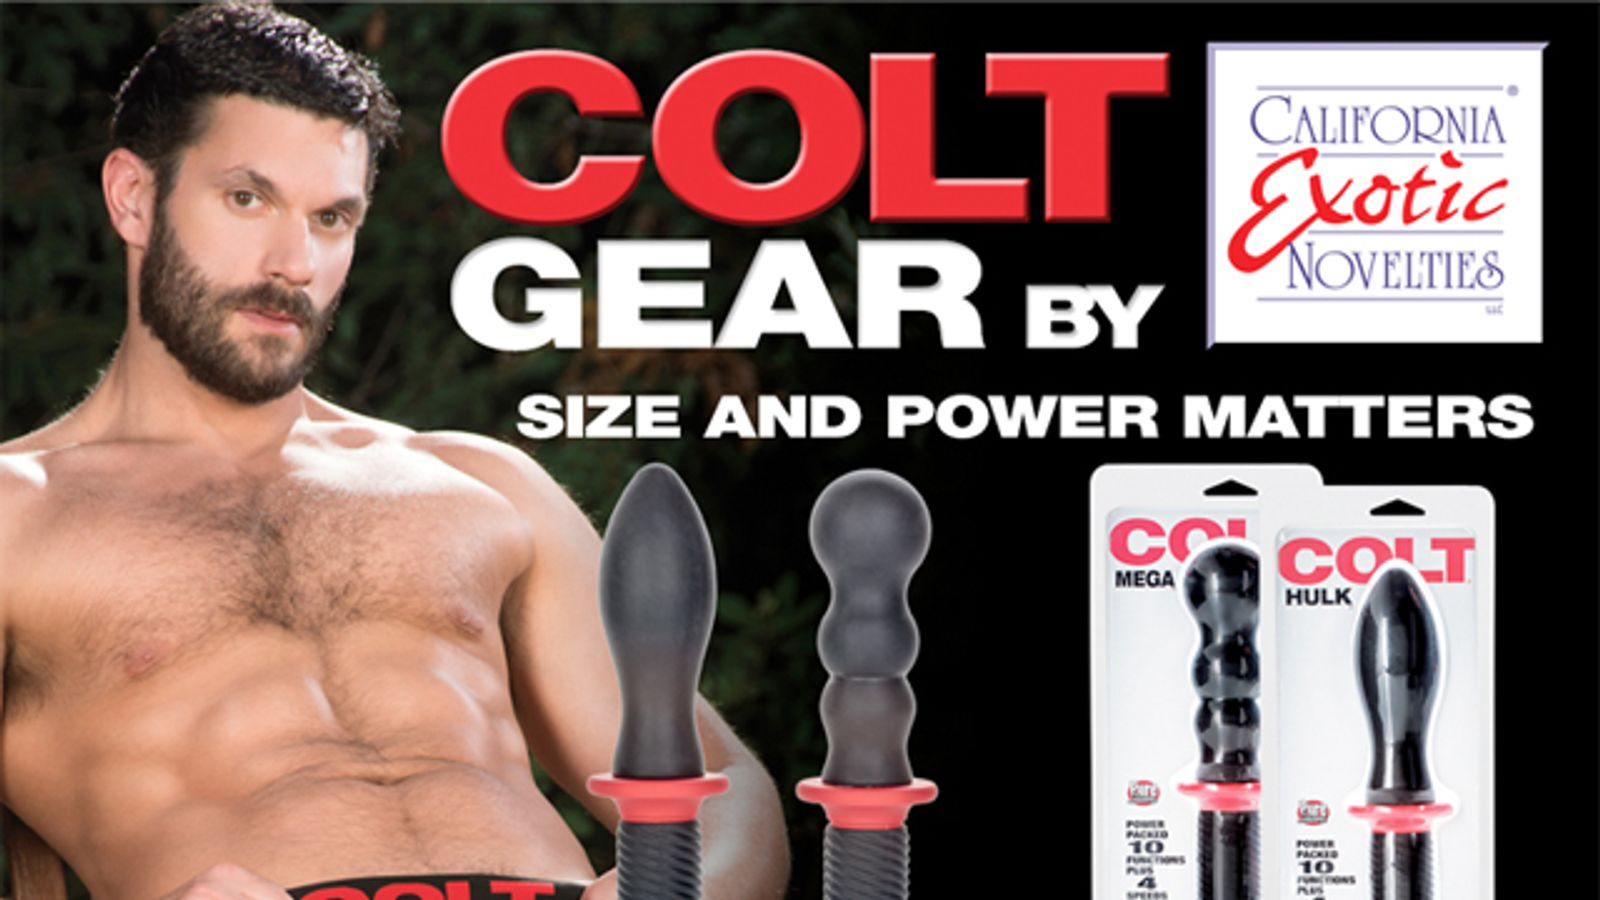 New Colt Gear Coming From CalExotics